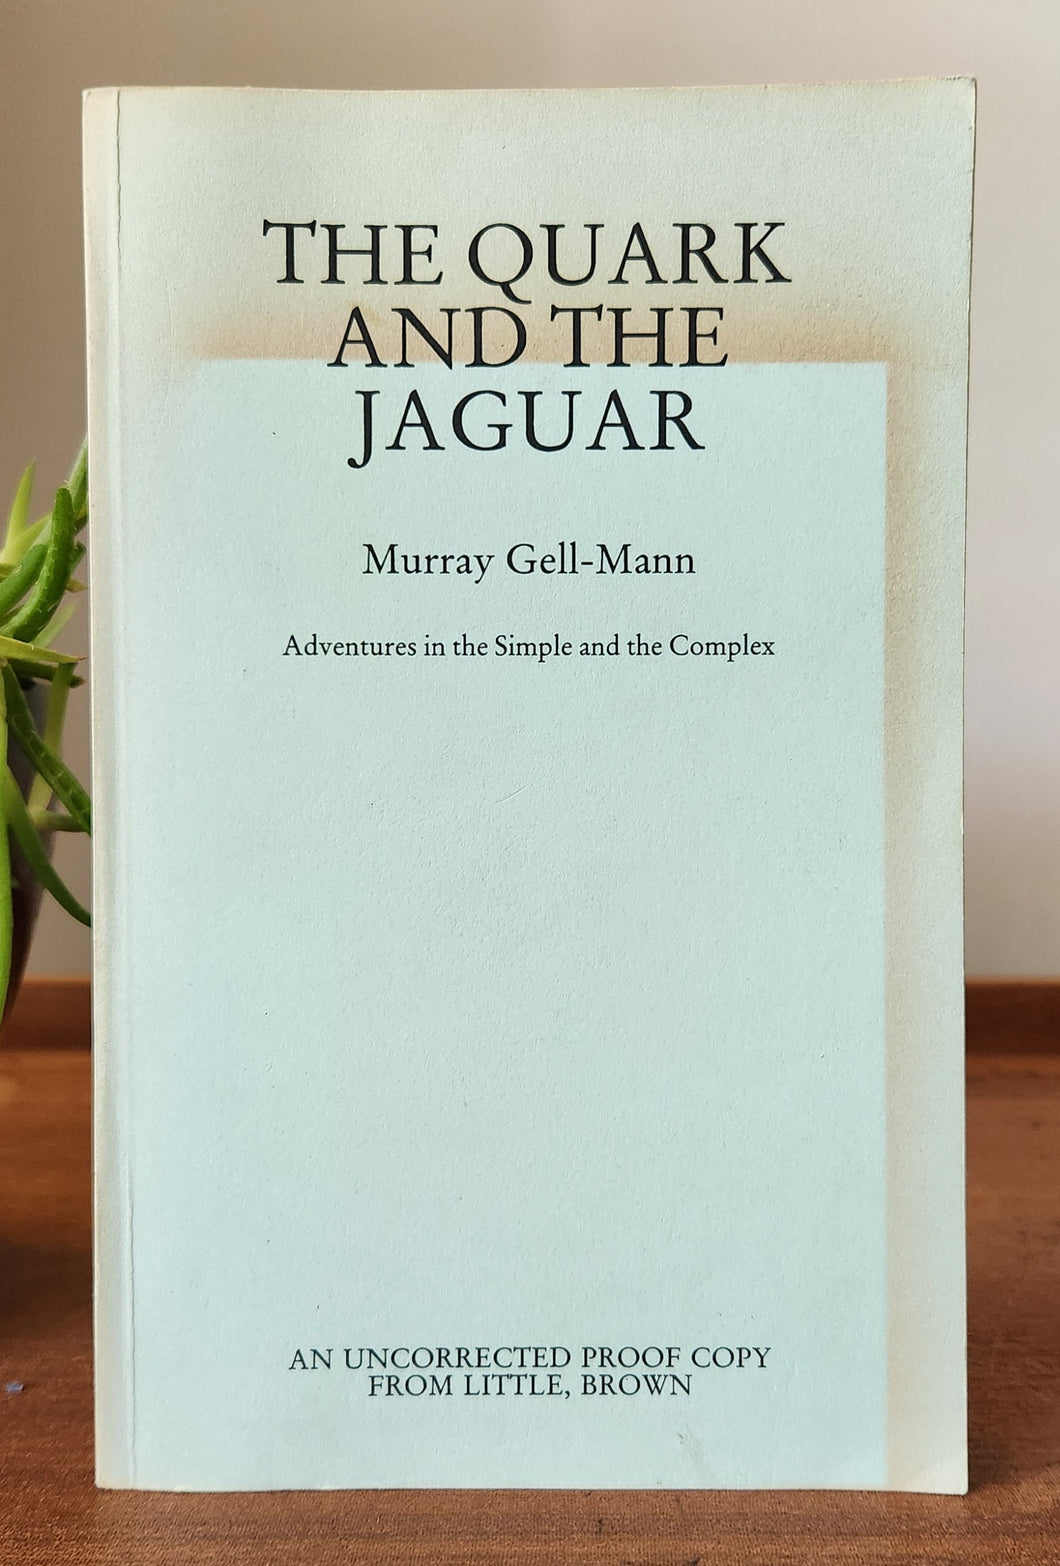 The Quark and the Jaguar by Murray Gell-Mann (Uncorrected Proof Copy)